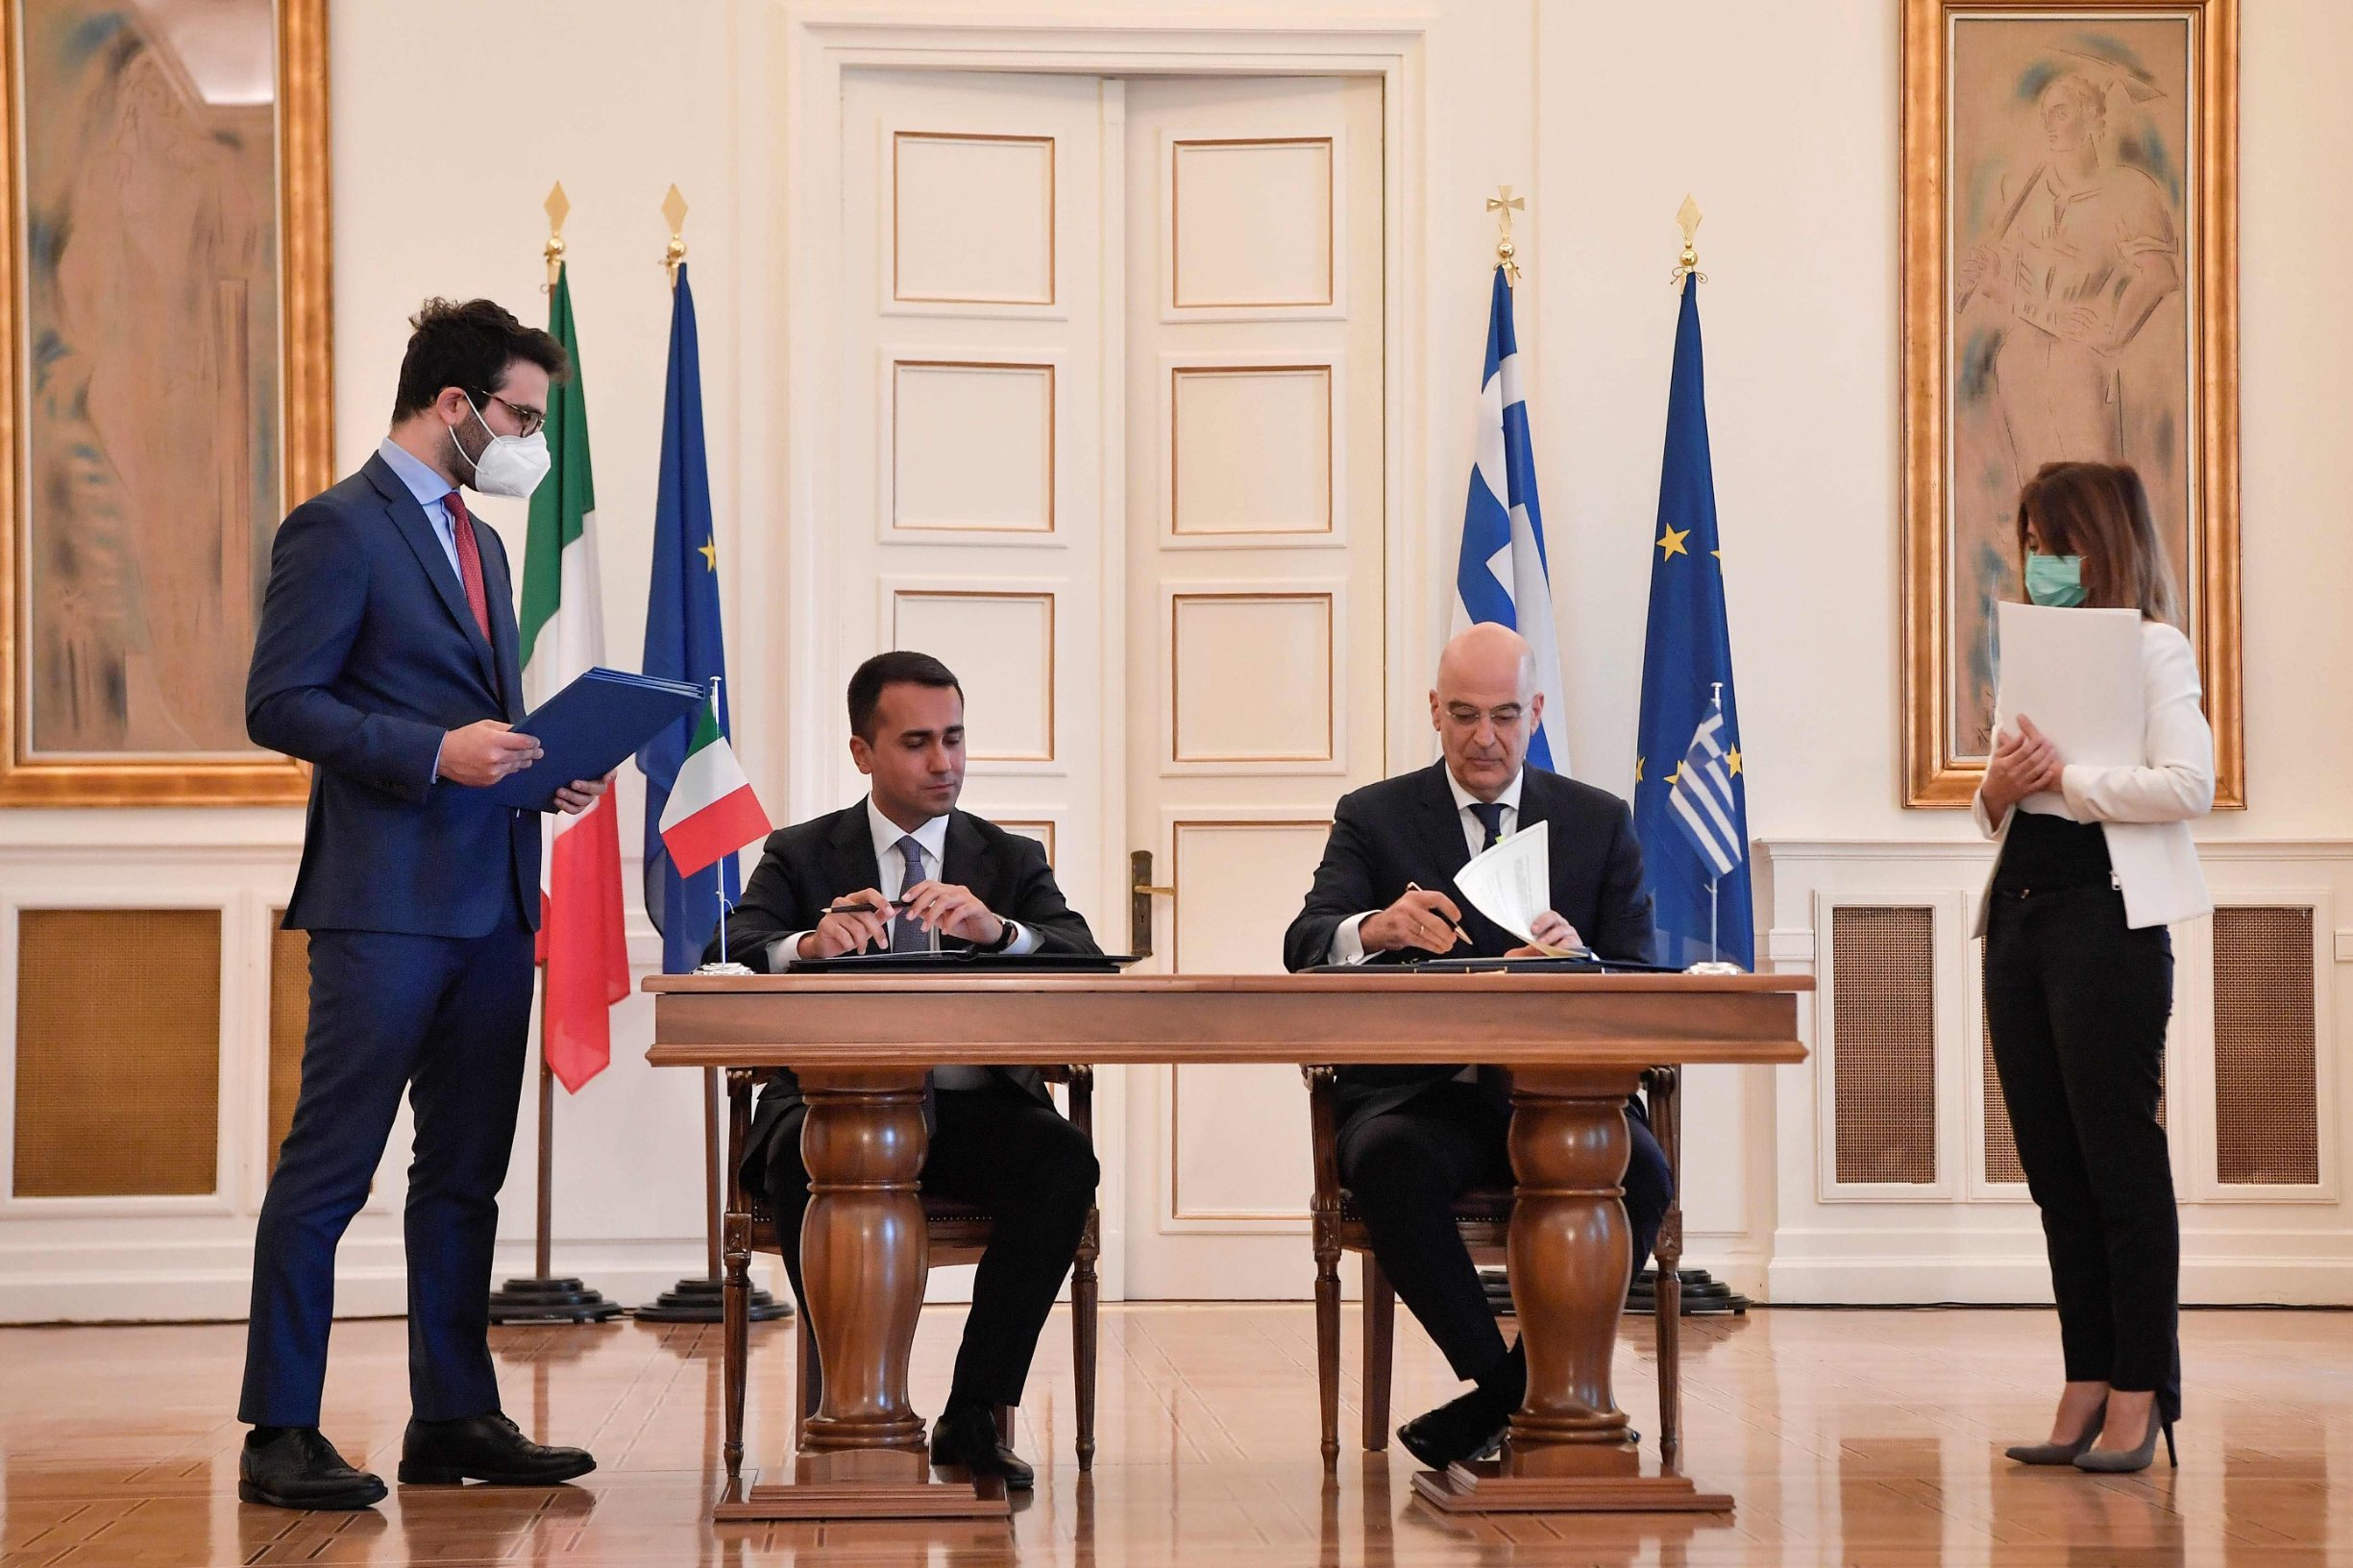 Italian foreign minister Luigi Di Maio and his Greek counterpart Nikos Dendias (R) sign a maritime zone agreement at the foreign ministry in Athens on June 9, 2020. (Photo by Louisa GOULIAMAKI / AFP)